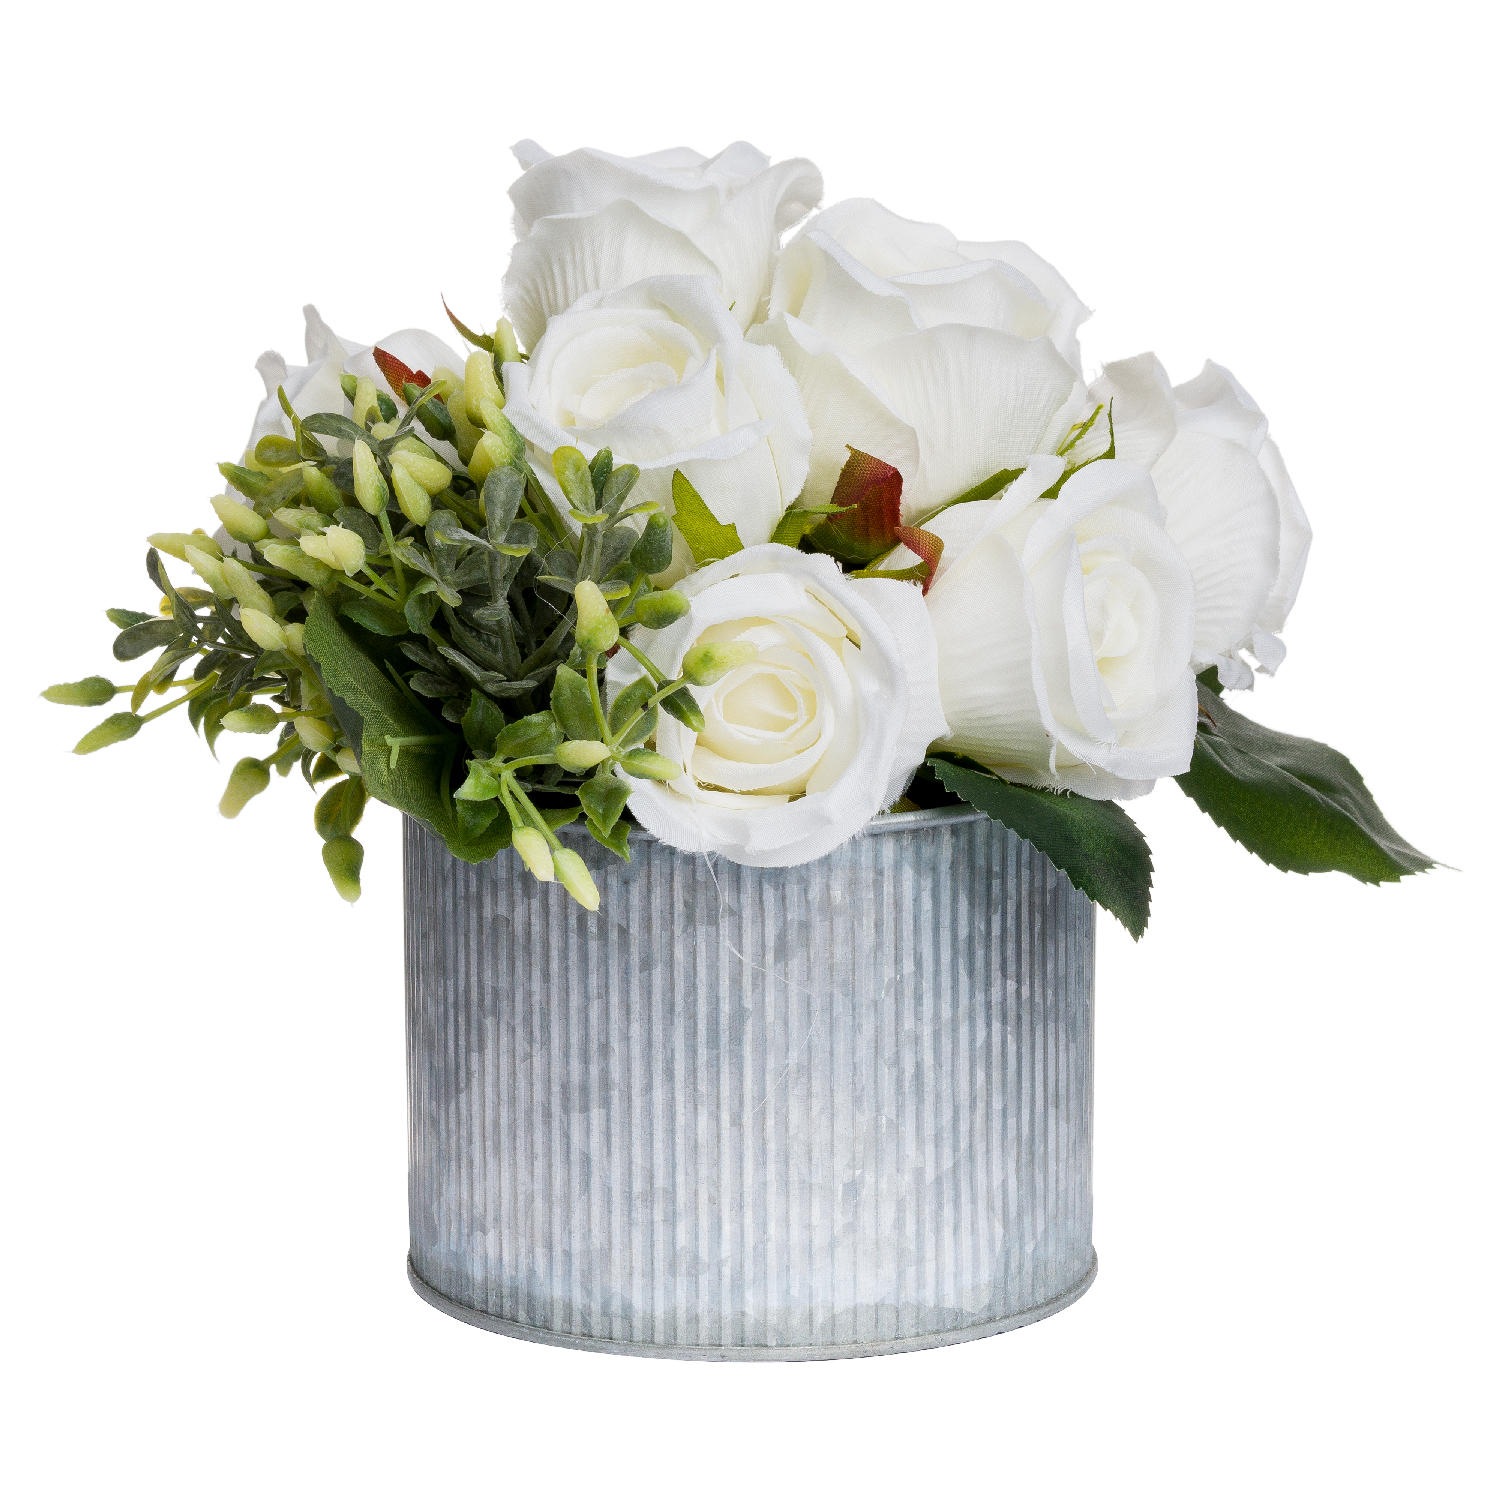 White Rose Bouquet In Tin Pot - Image 1